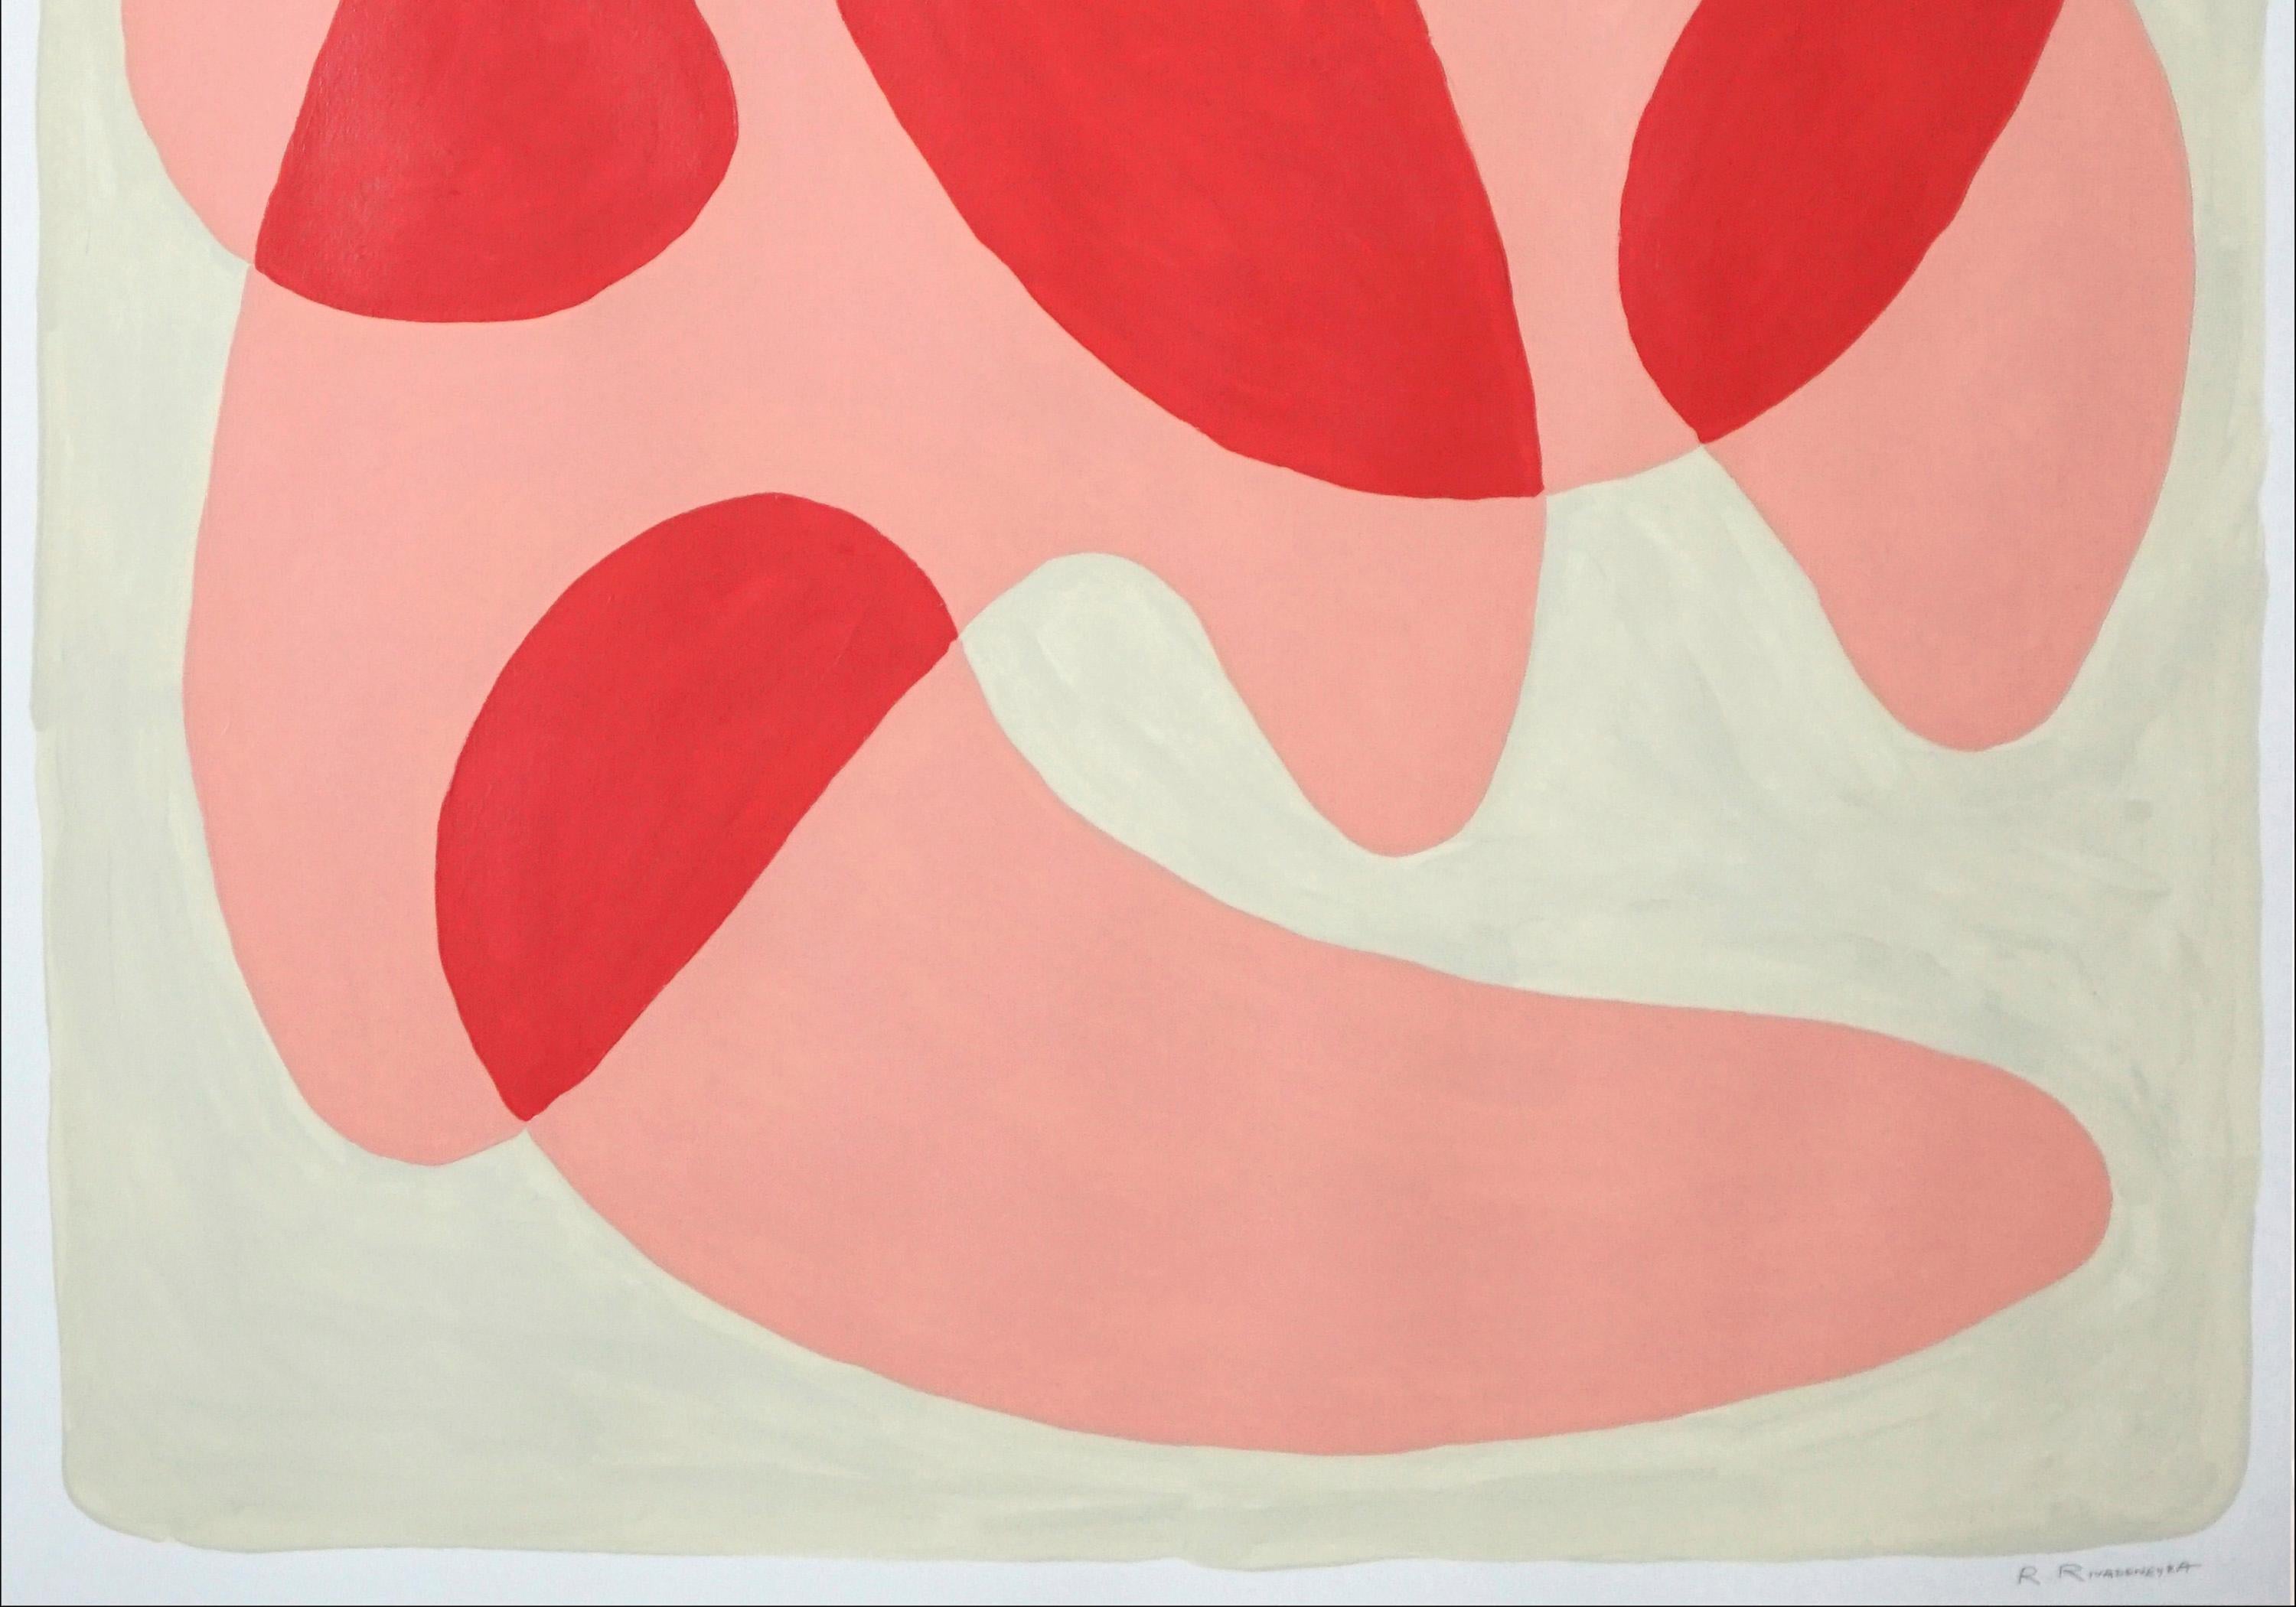 Rounded Simple Shapes in Warm Tones, Pastel Palette, Mid-Century Painting, 2021 3